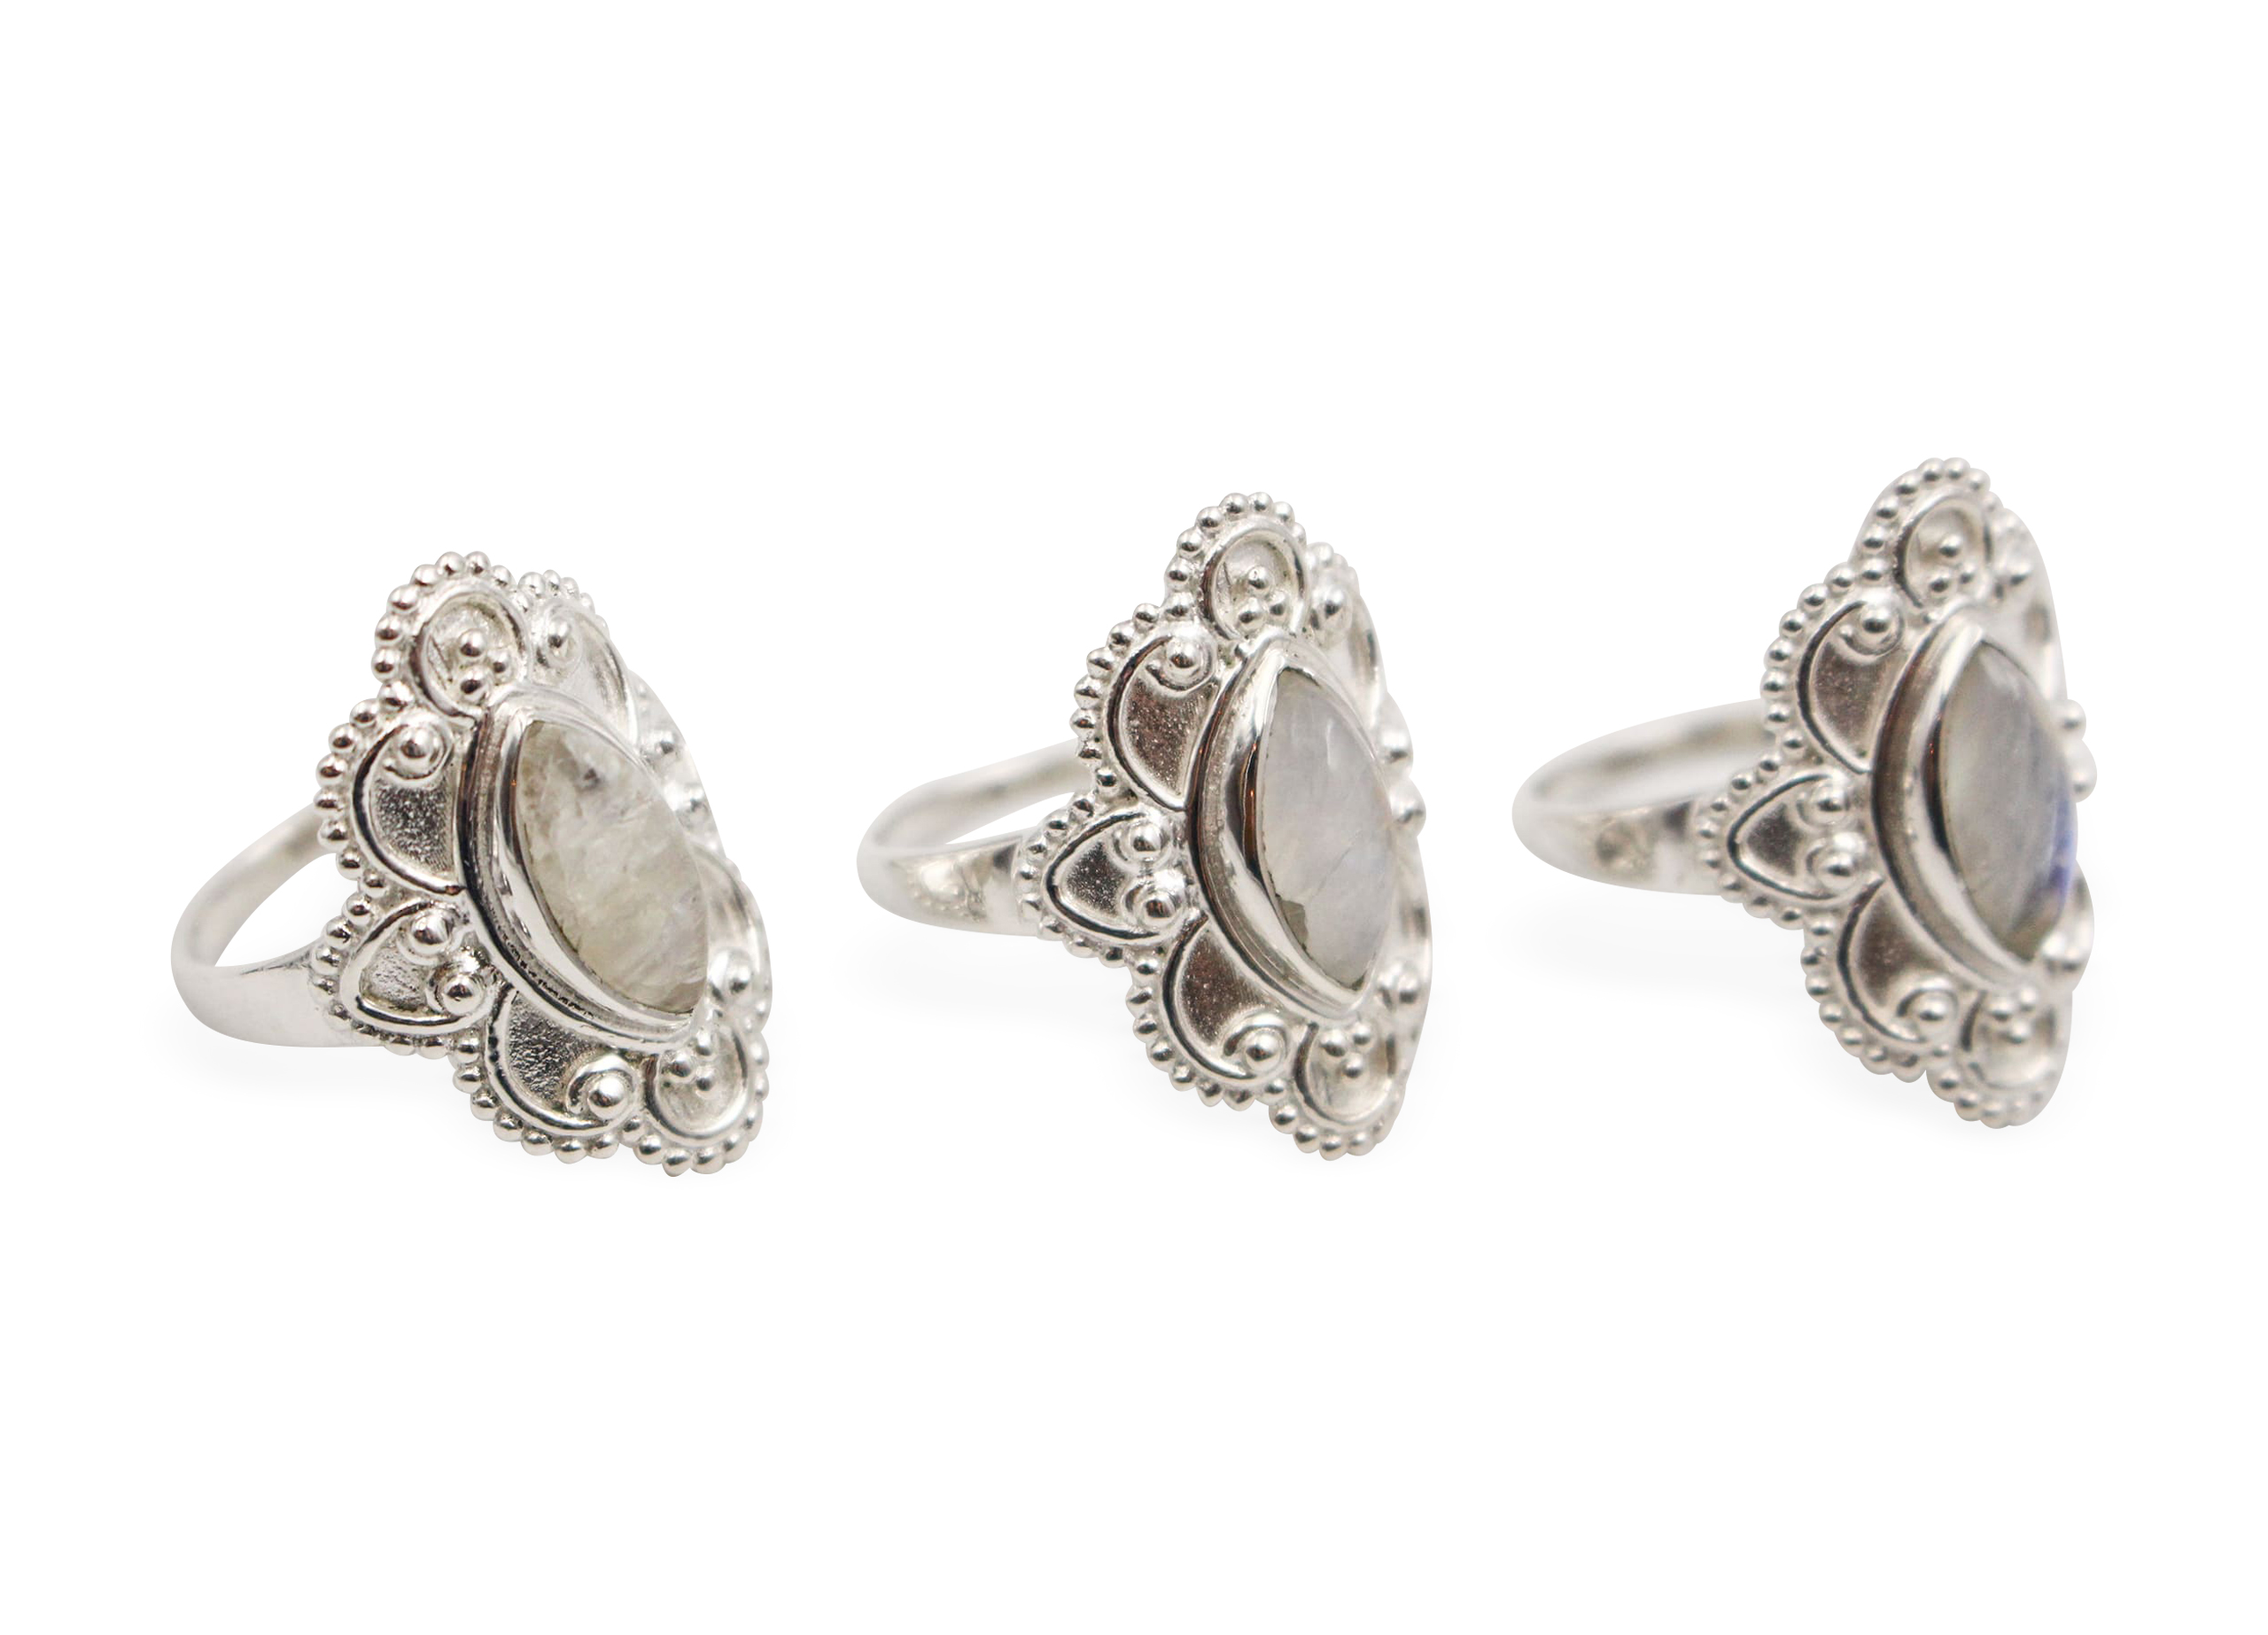 Moonstone _Majesty_ Sterling Silver Ring - Crystal Dreams